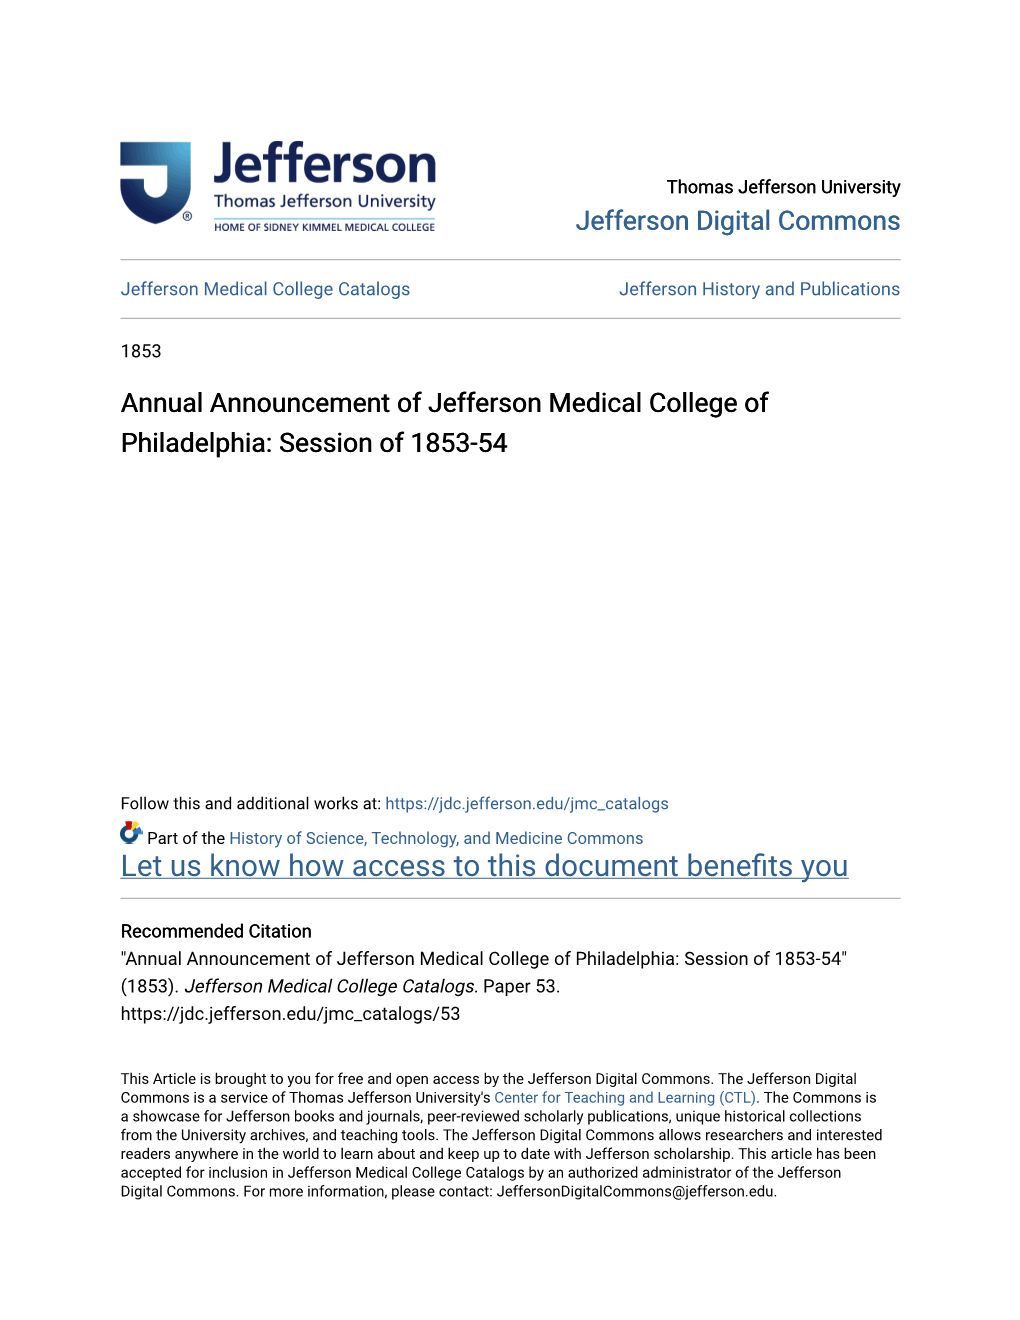 Annual Announcement of Jefferson Medical College of Philadelphia: Session of 1853-54